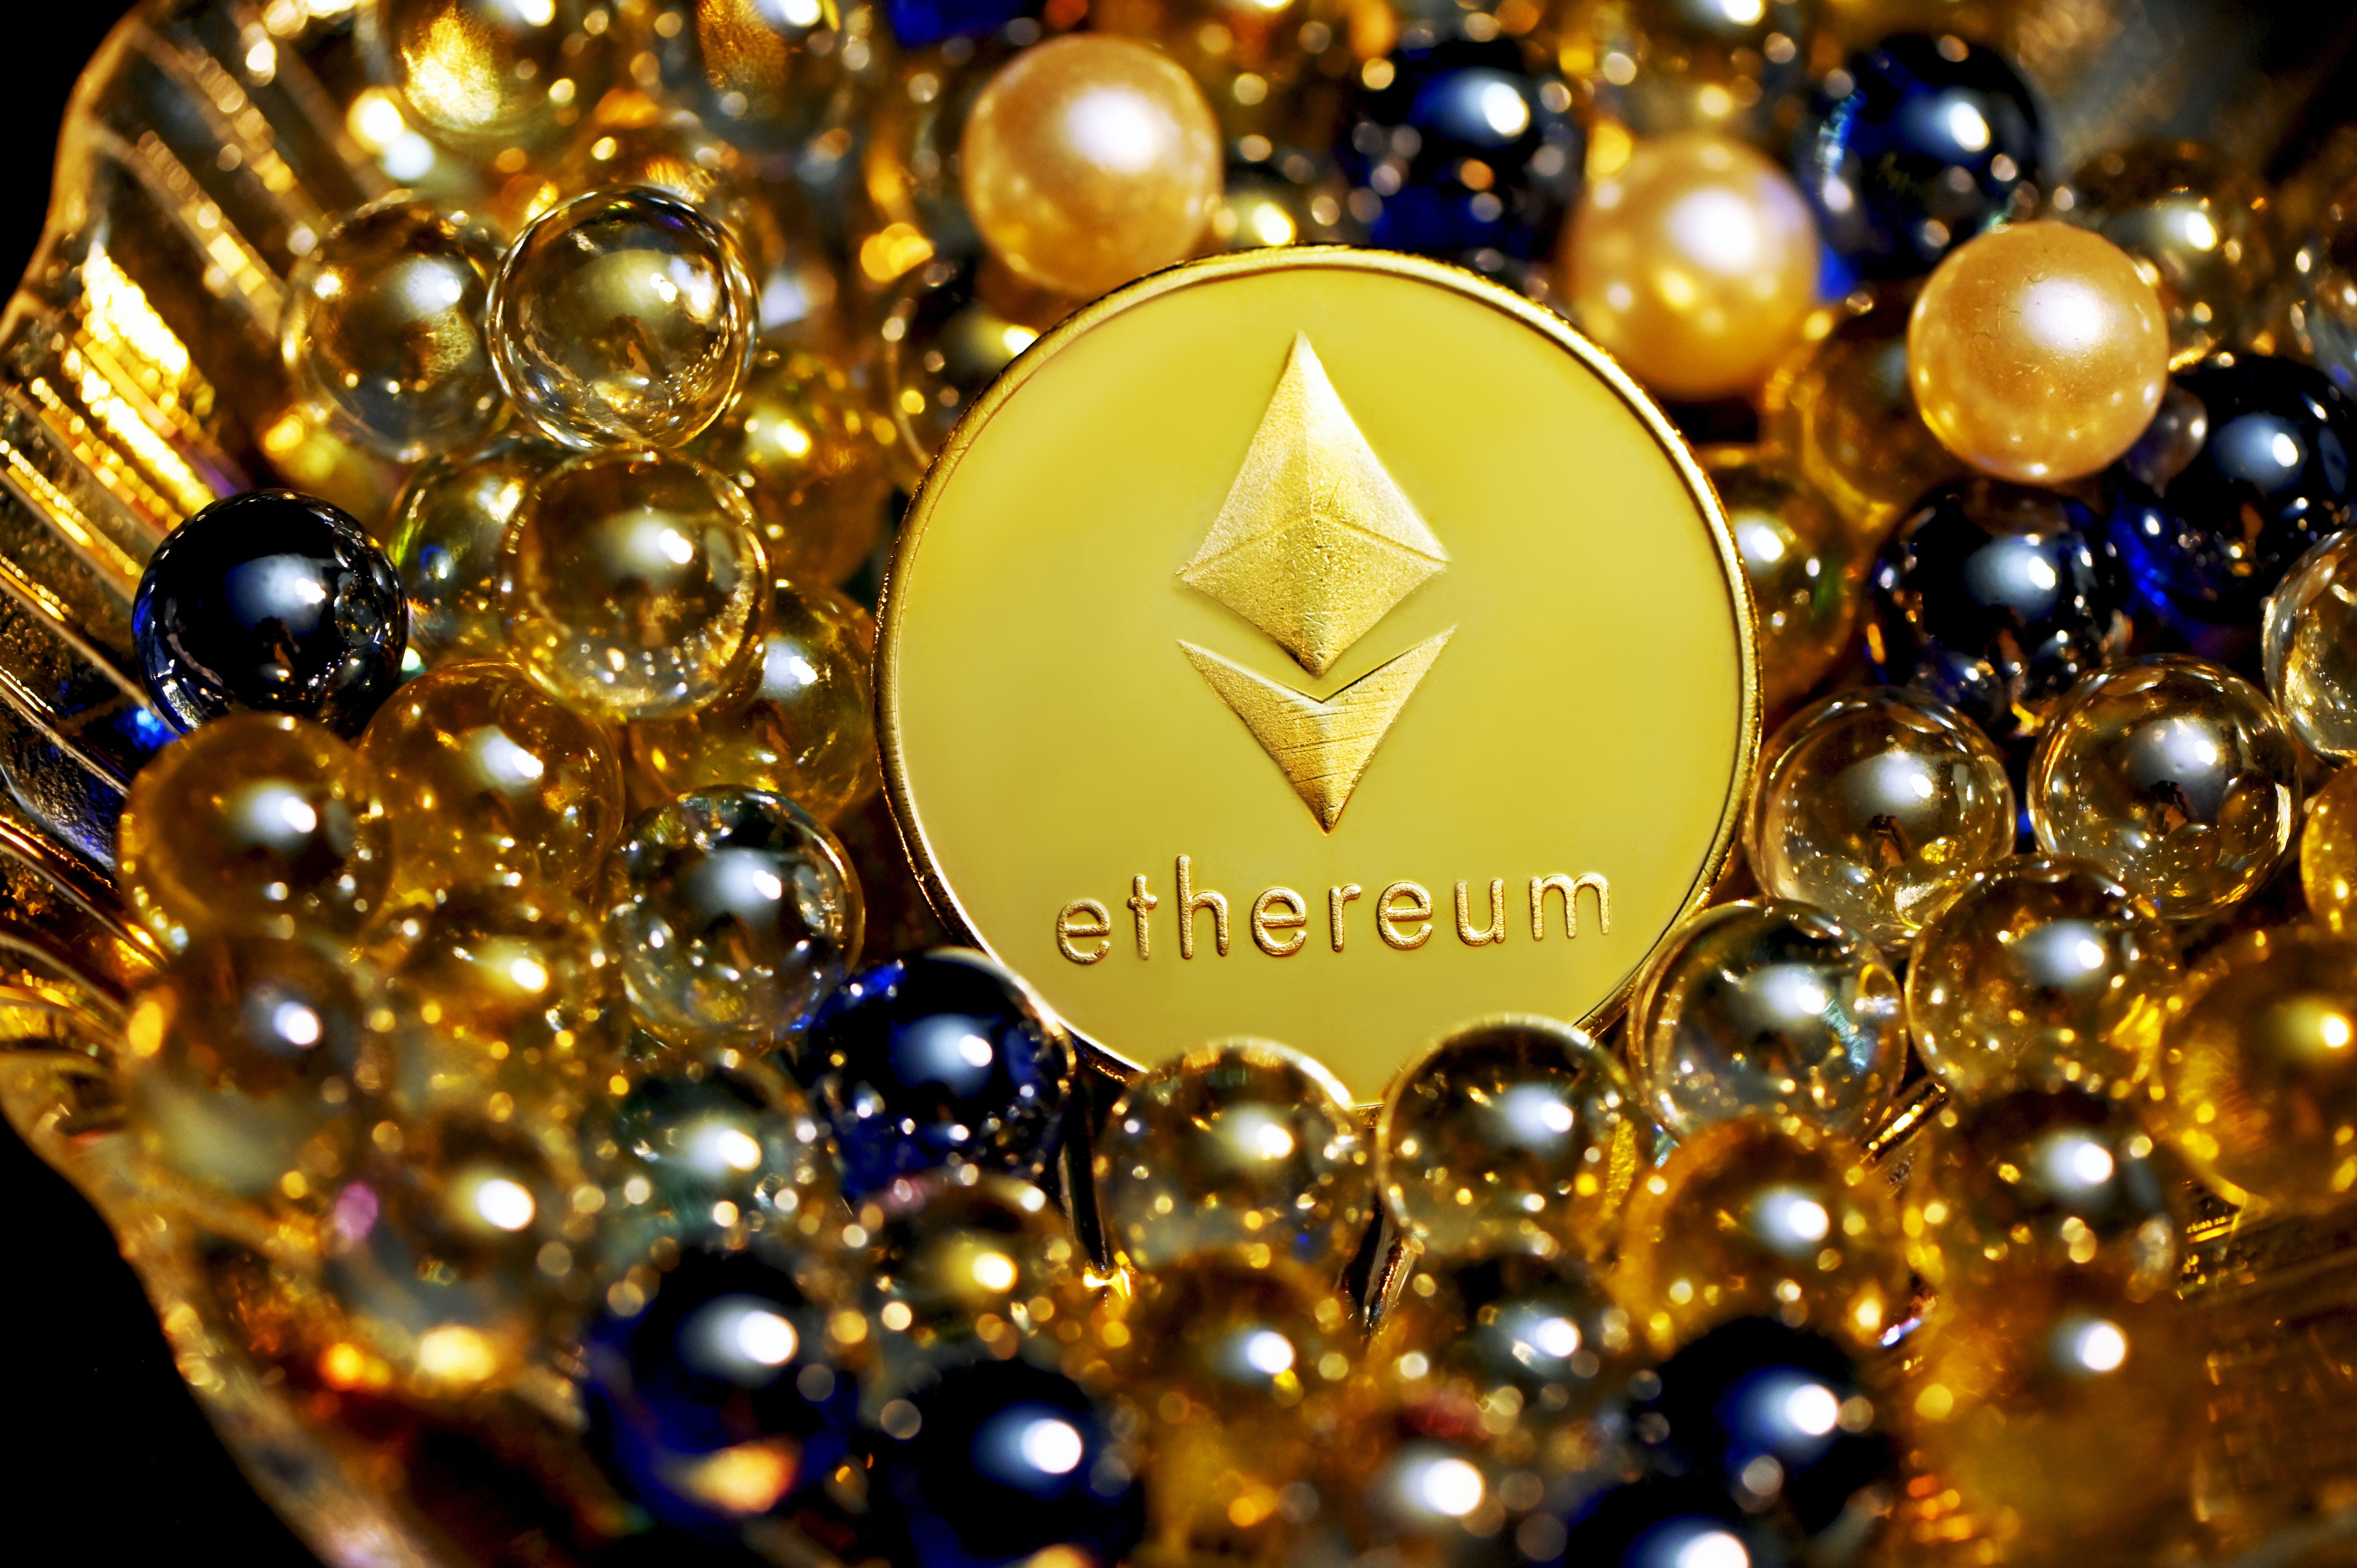 Ethereum 2.0 Upgrade Looks To Be Coming In 2022: Here's What Changed And How To Prepare